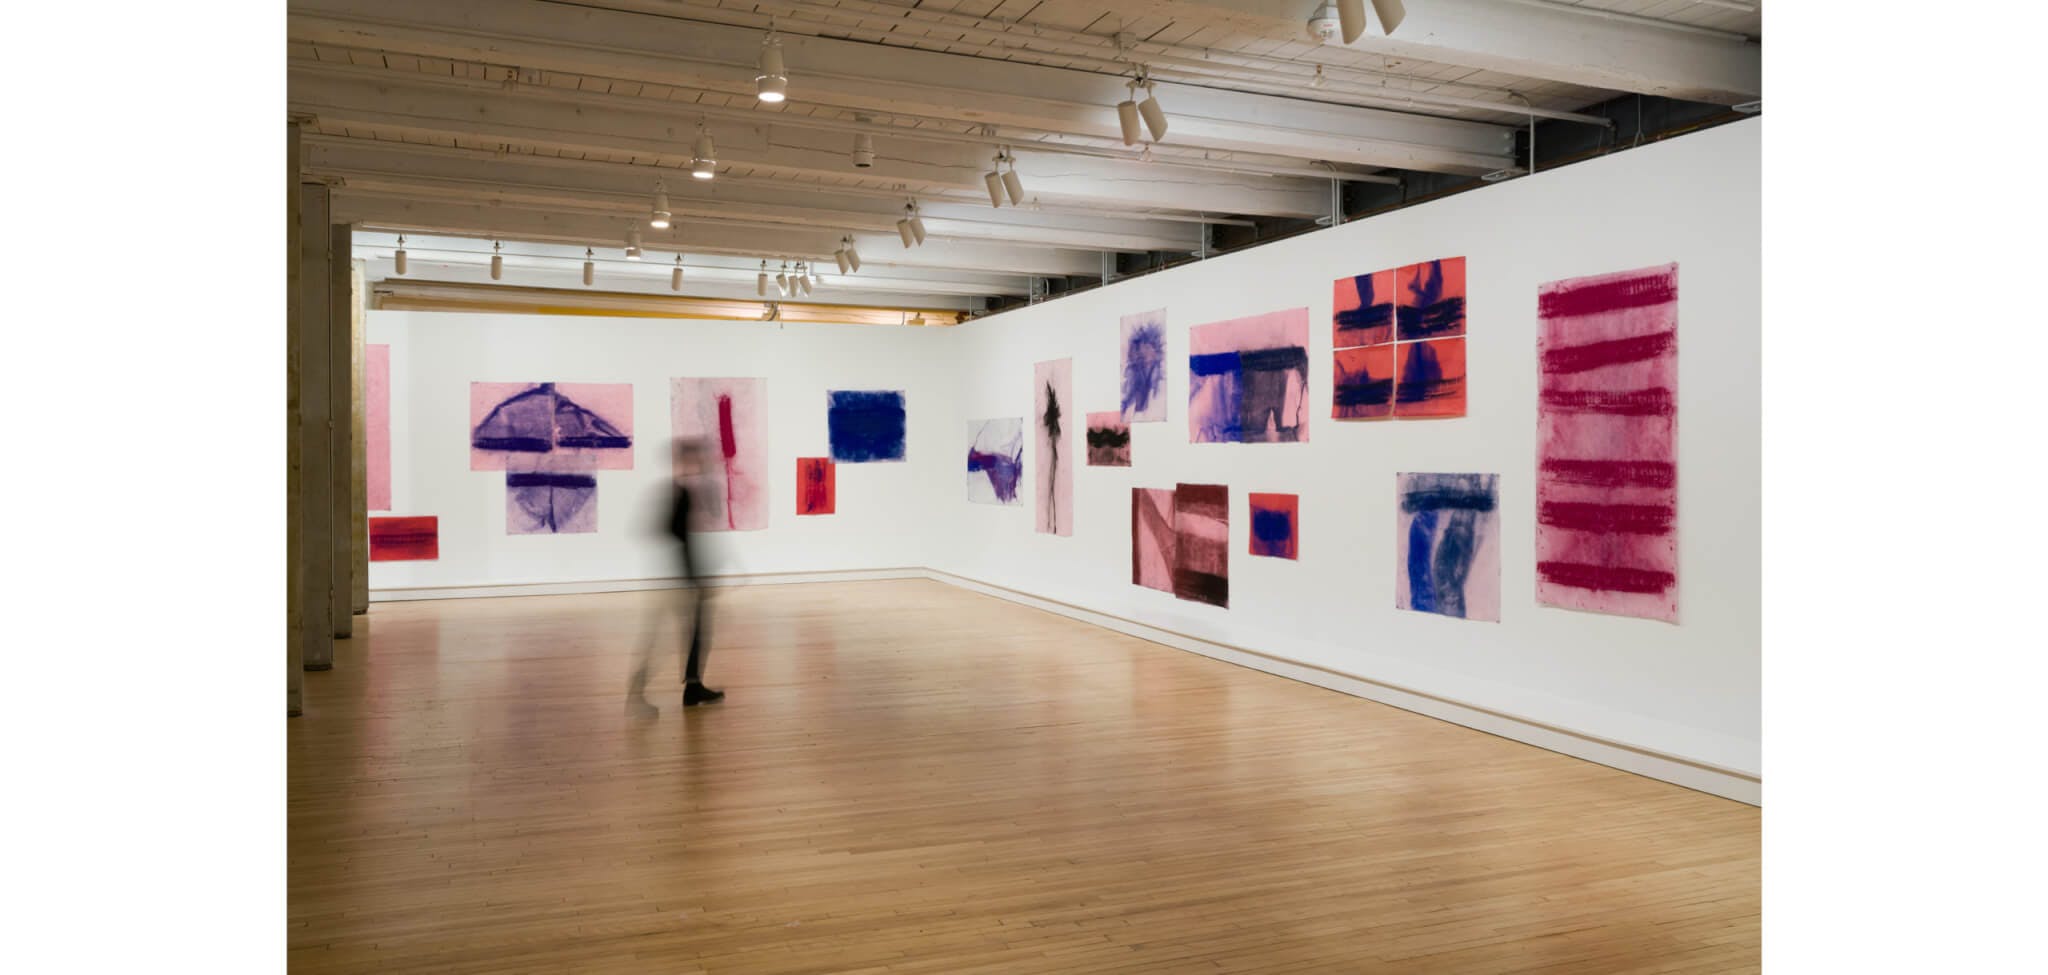 Works on paper by Jason Moran adorn the walls of a gallery, while the blurred figure of a visitor appears in the center of the room.